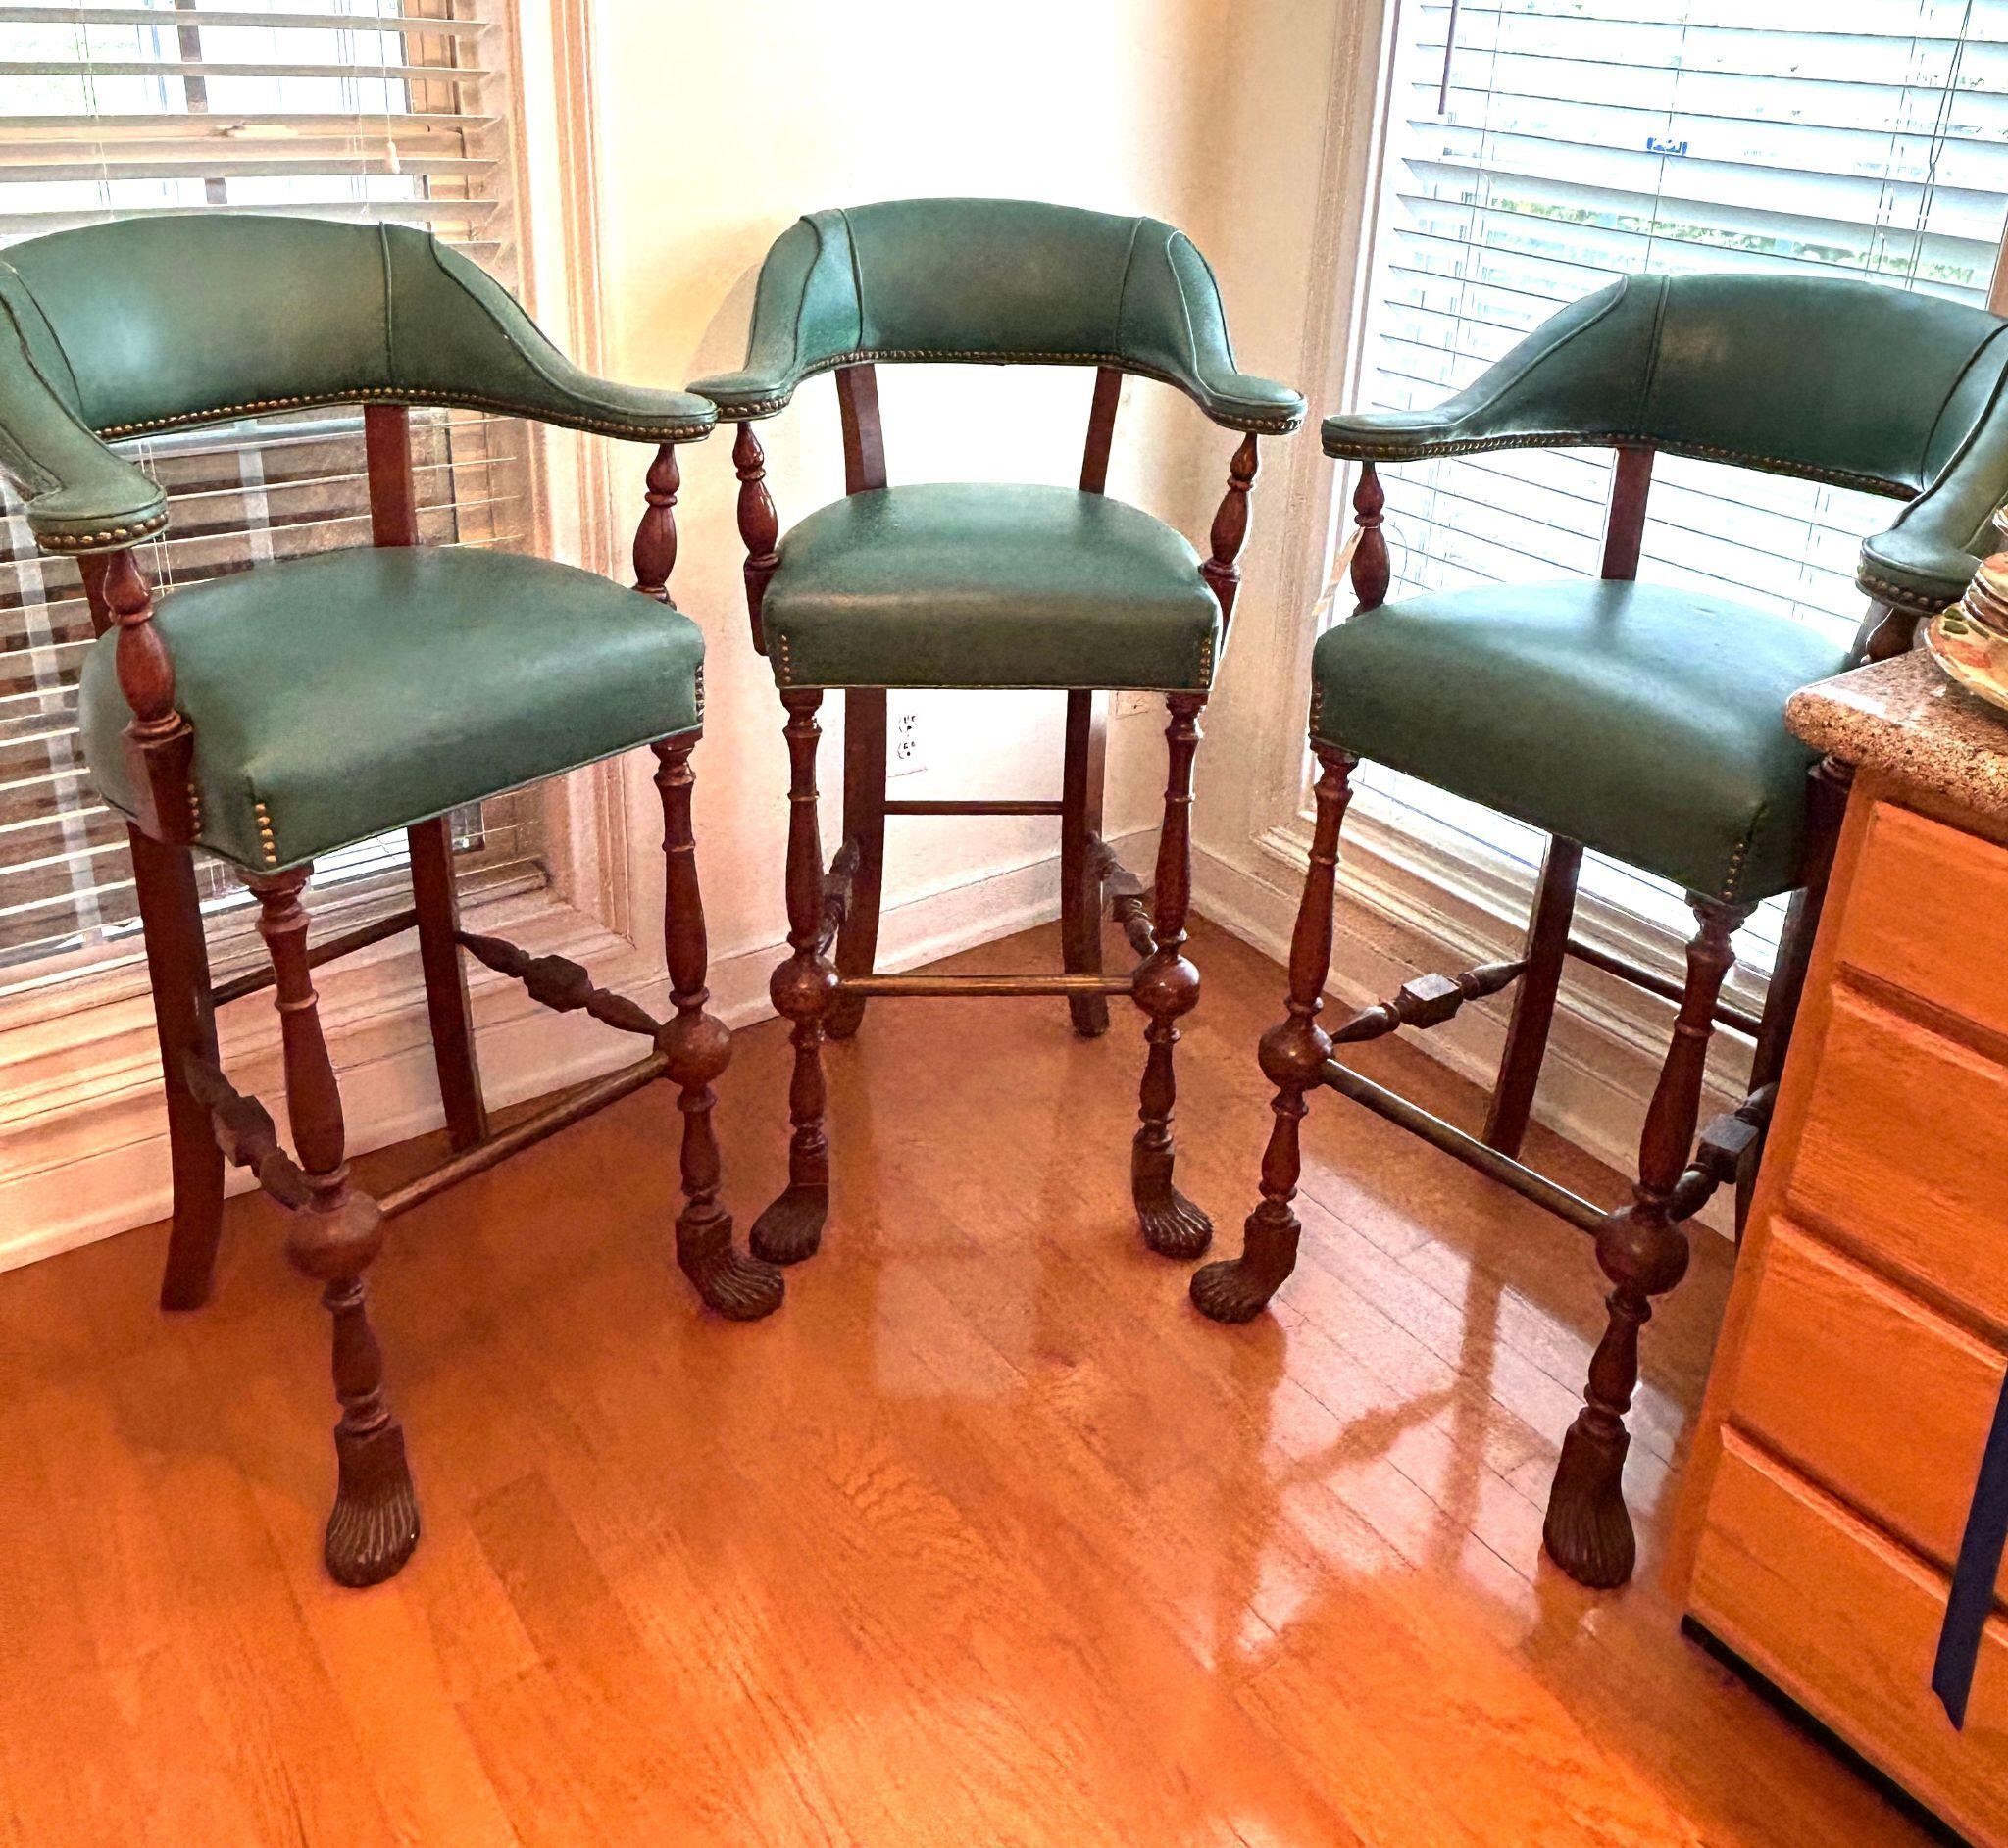 SET OF 3 TEAL BAR STOOLS, ARMS, FOOT REST, FEET